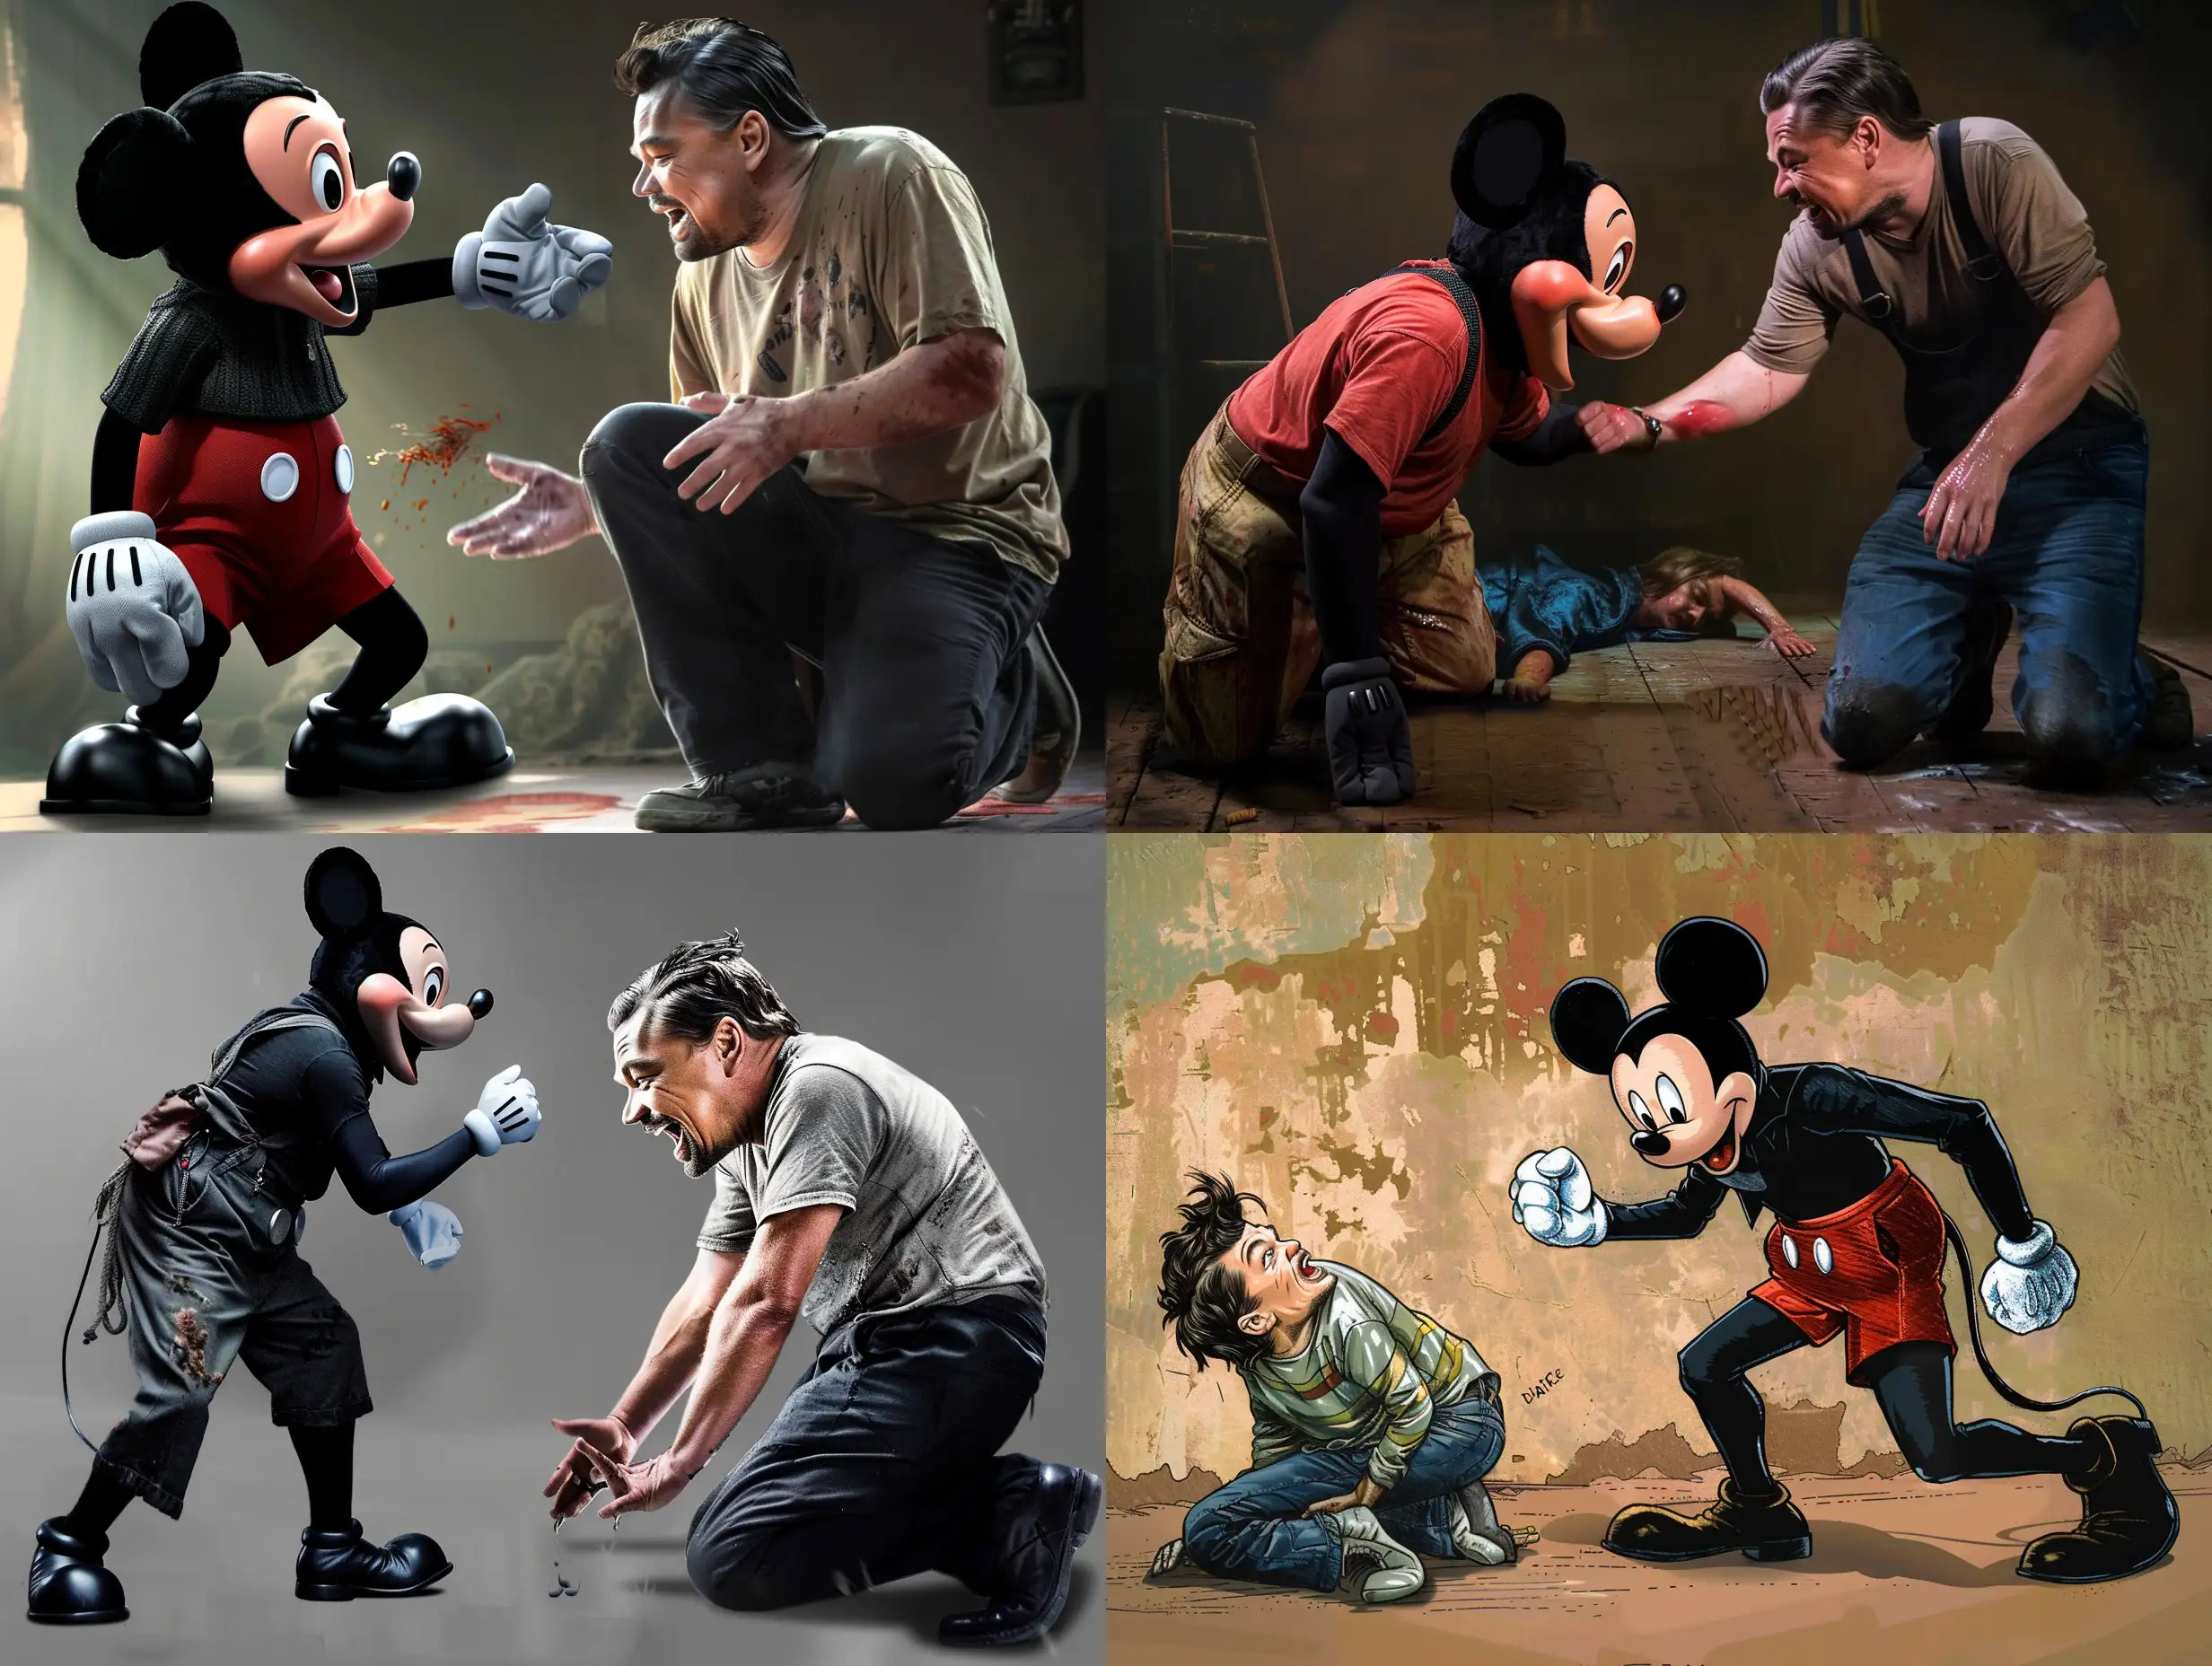 Angry-Mickey-Mouse-Confronts-Tearful-Leonardo-DiCaprio